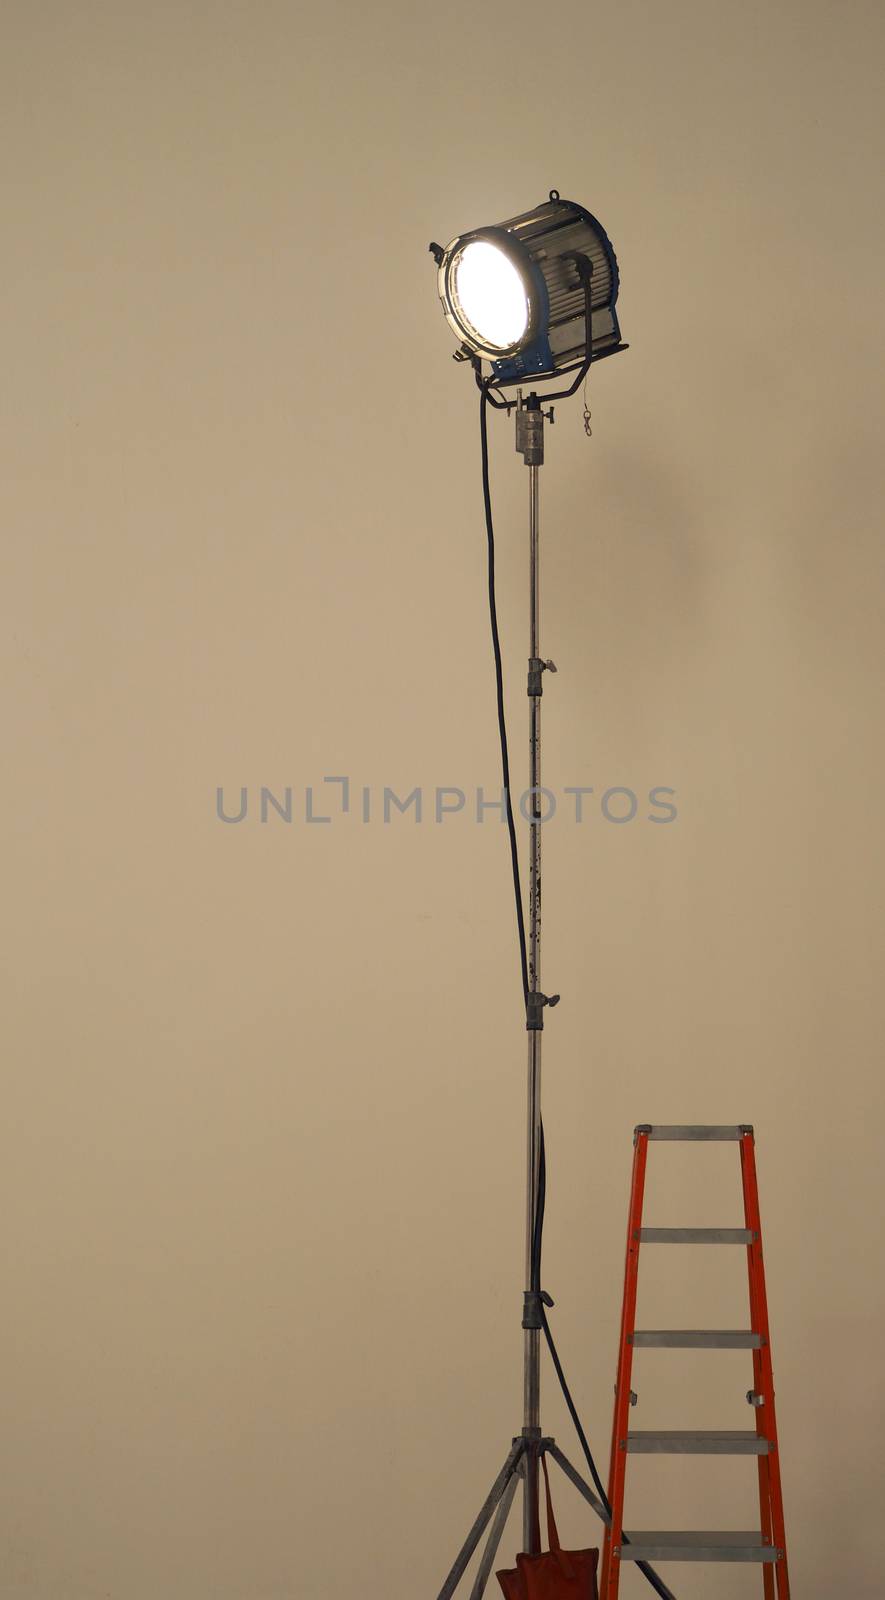 Big LED spotlight equipment for video or movie shooting in studio production.